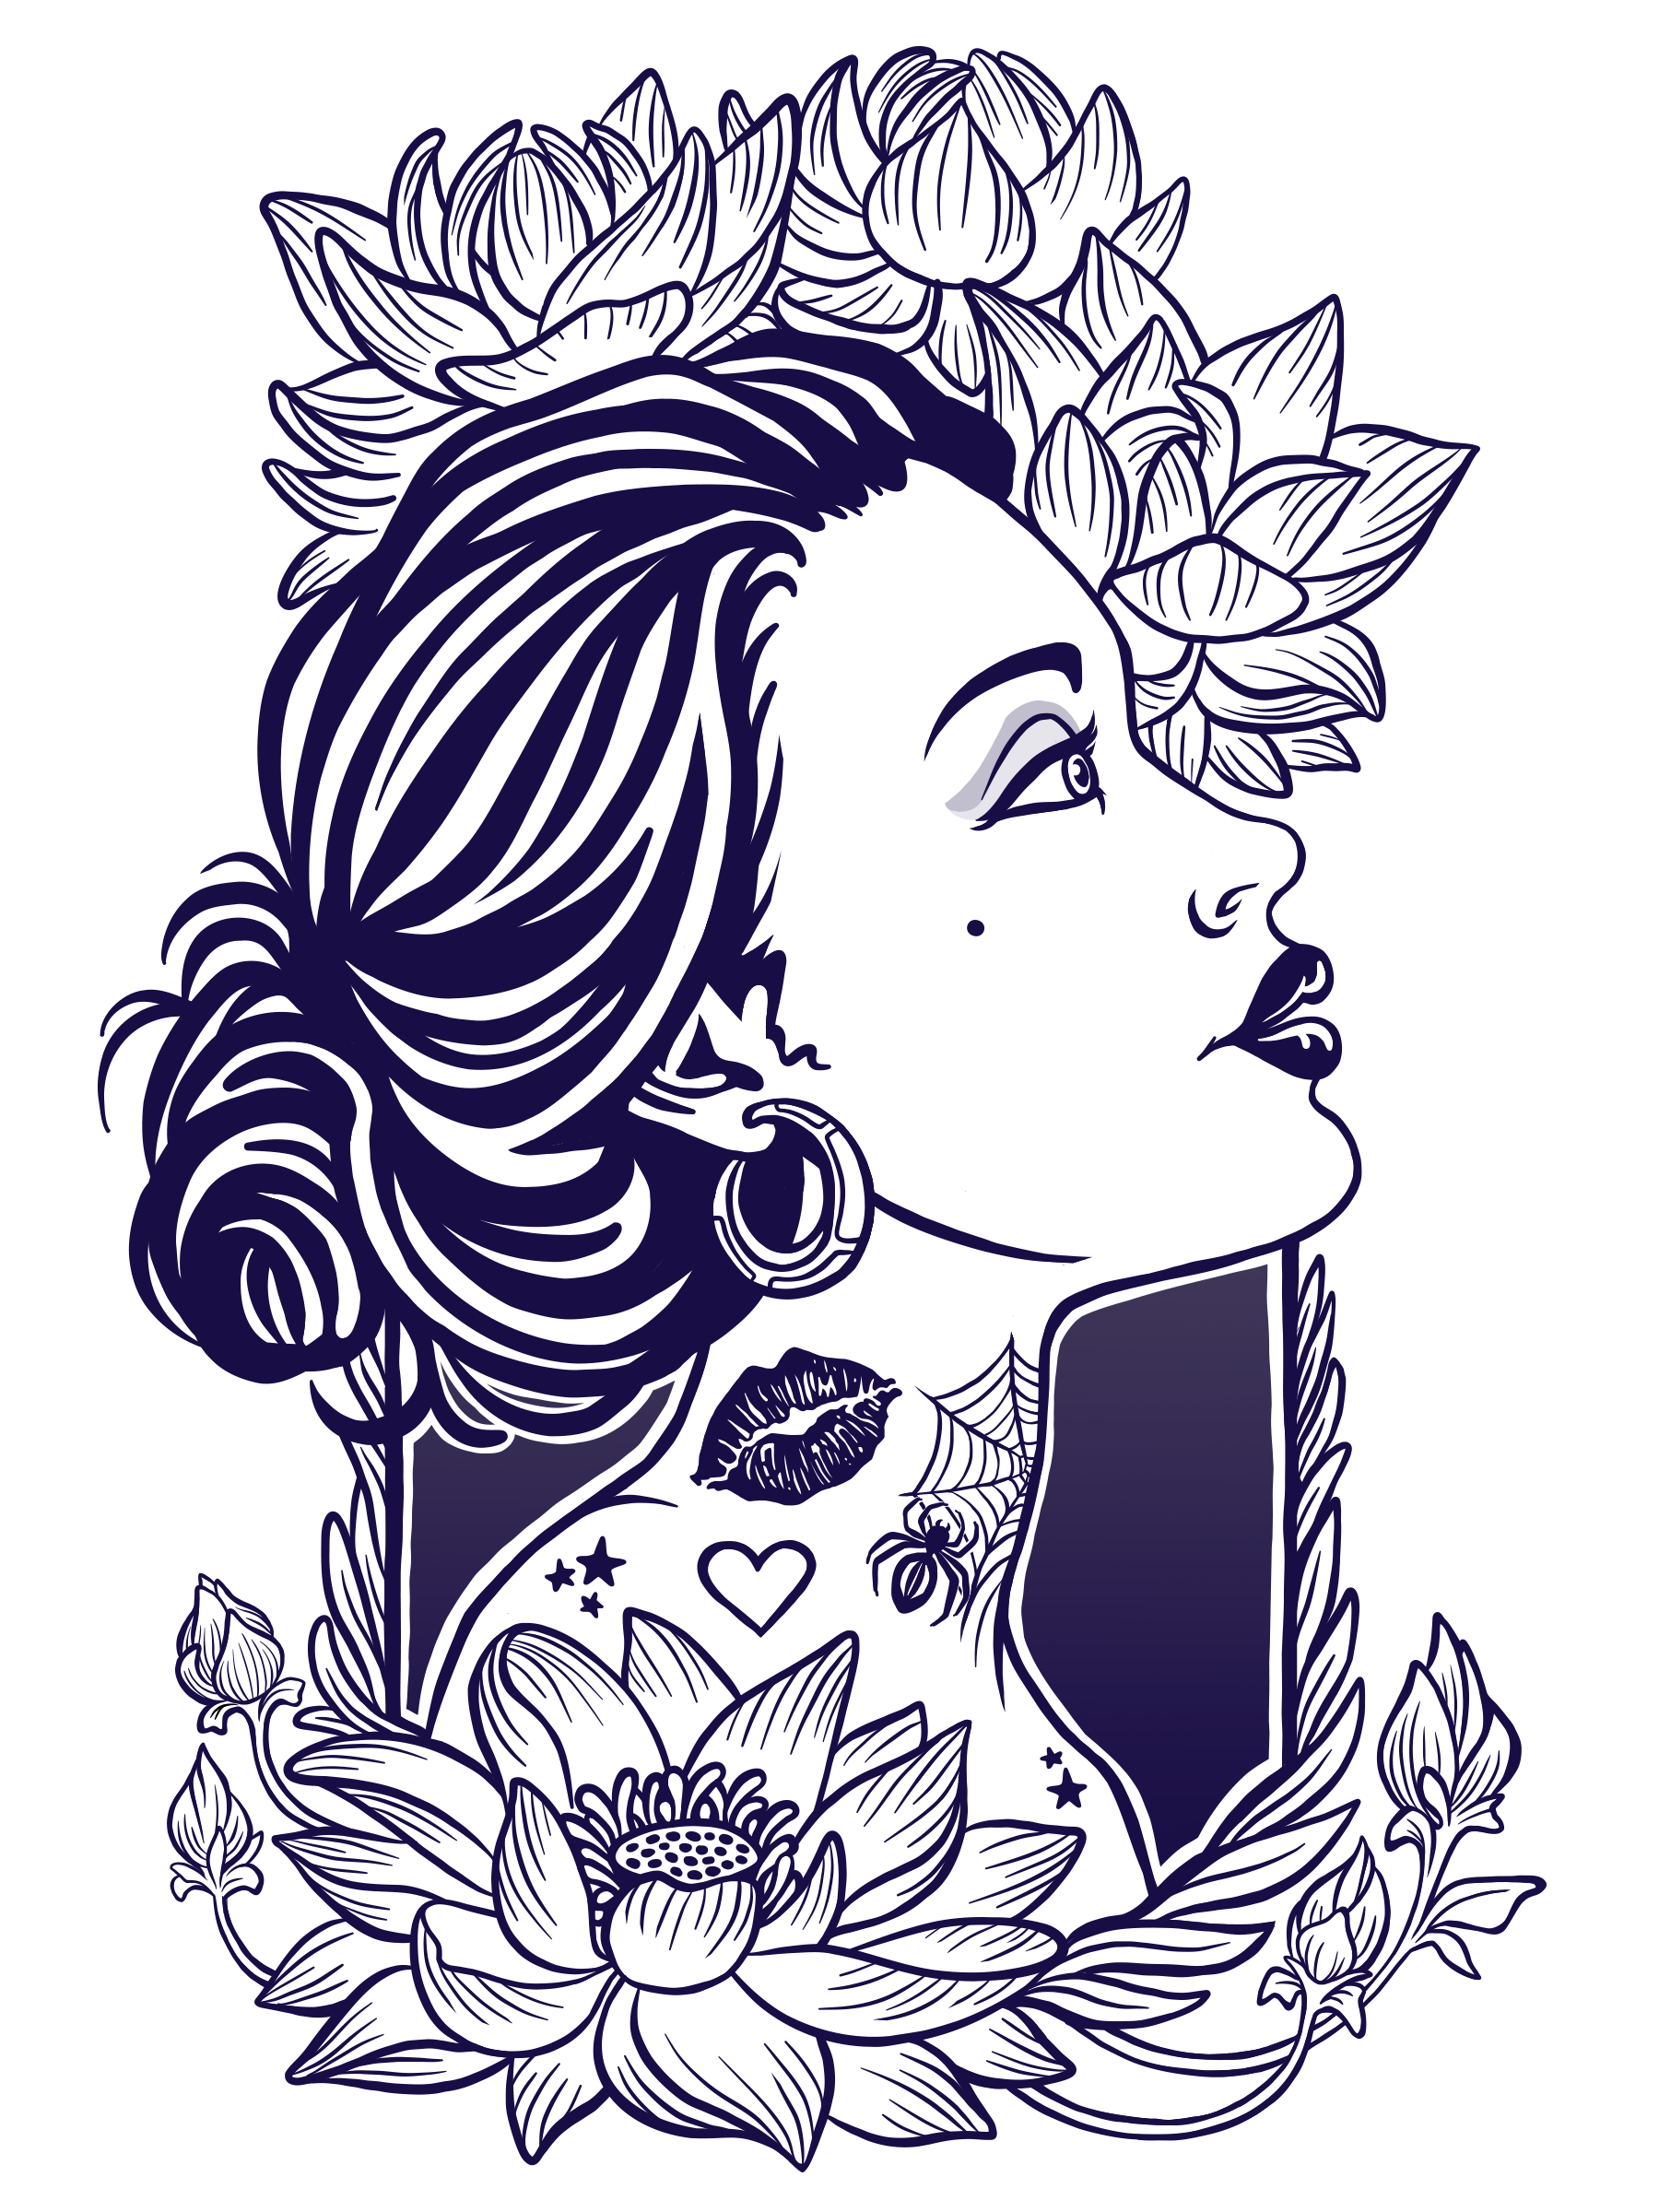 Bold Black and White Profile with Floral Peony Border Cartoon Illustration Logo Graphic by Jessica Laine Morris 